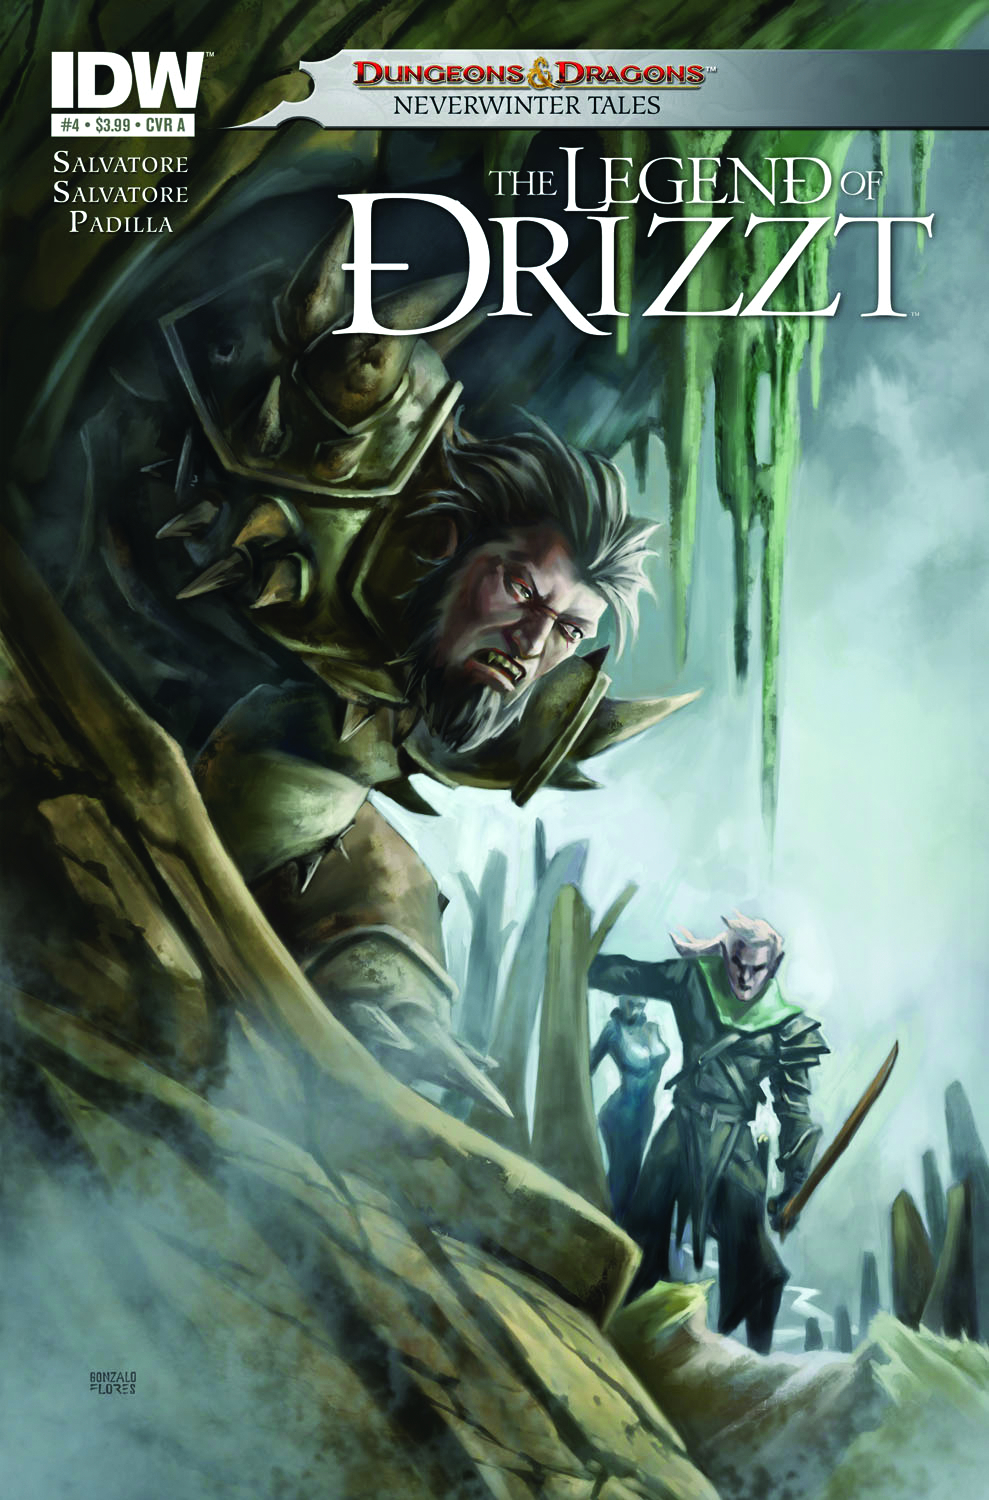 DUNGEONS & DRAGONS DRIZZT #4 (OF 5)